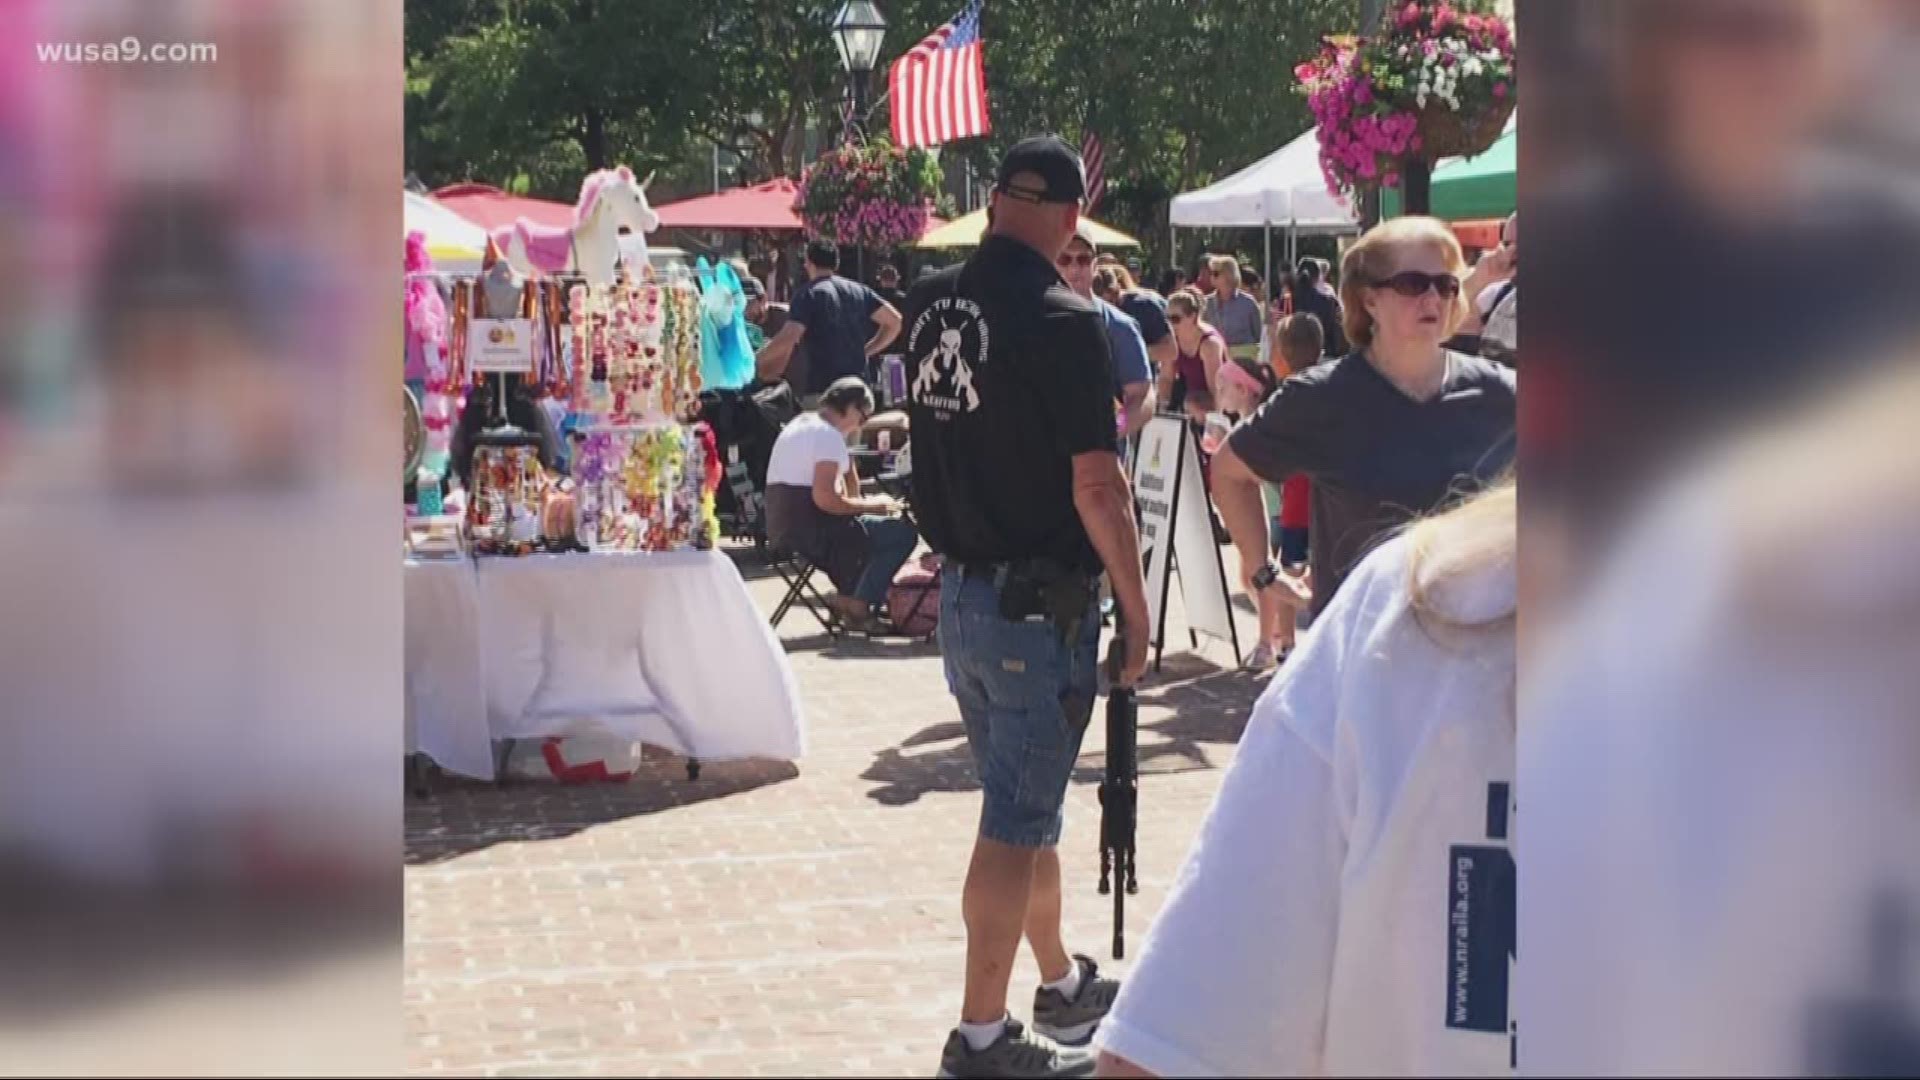 Some people are calling this a shocking sight, pictures like this show a man carrying an assault rifle through the Alexandria farmers market.